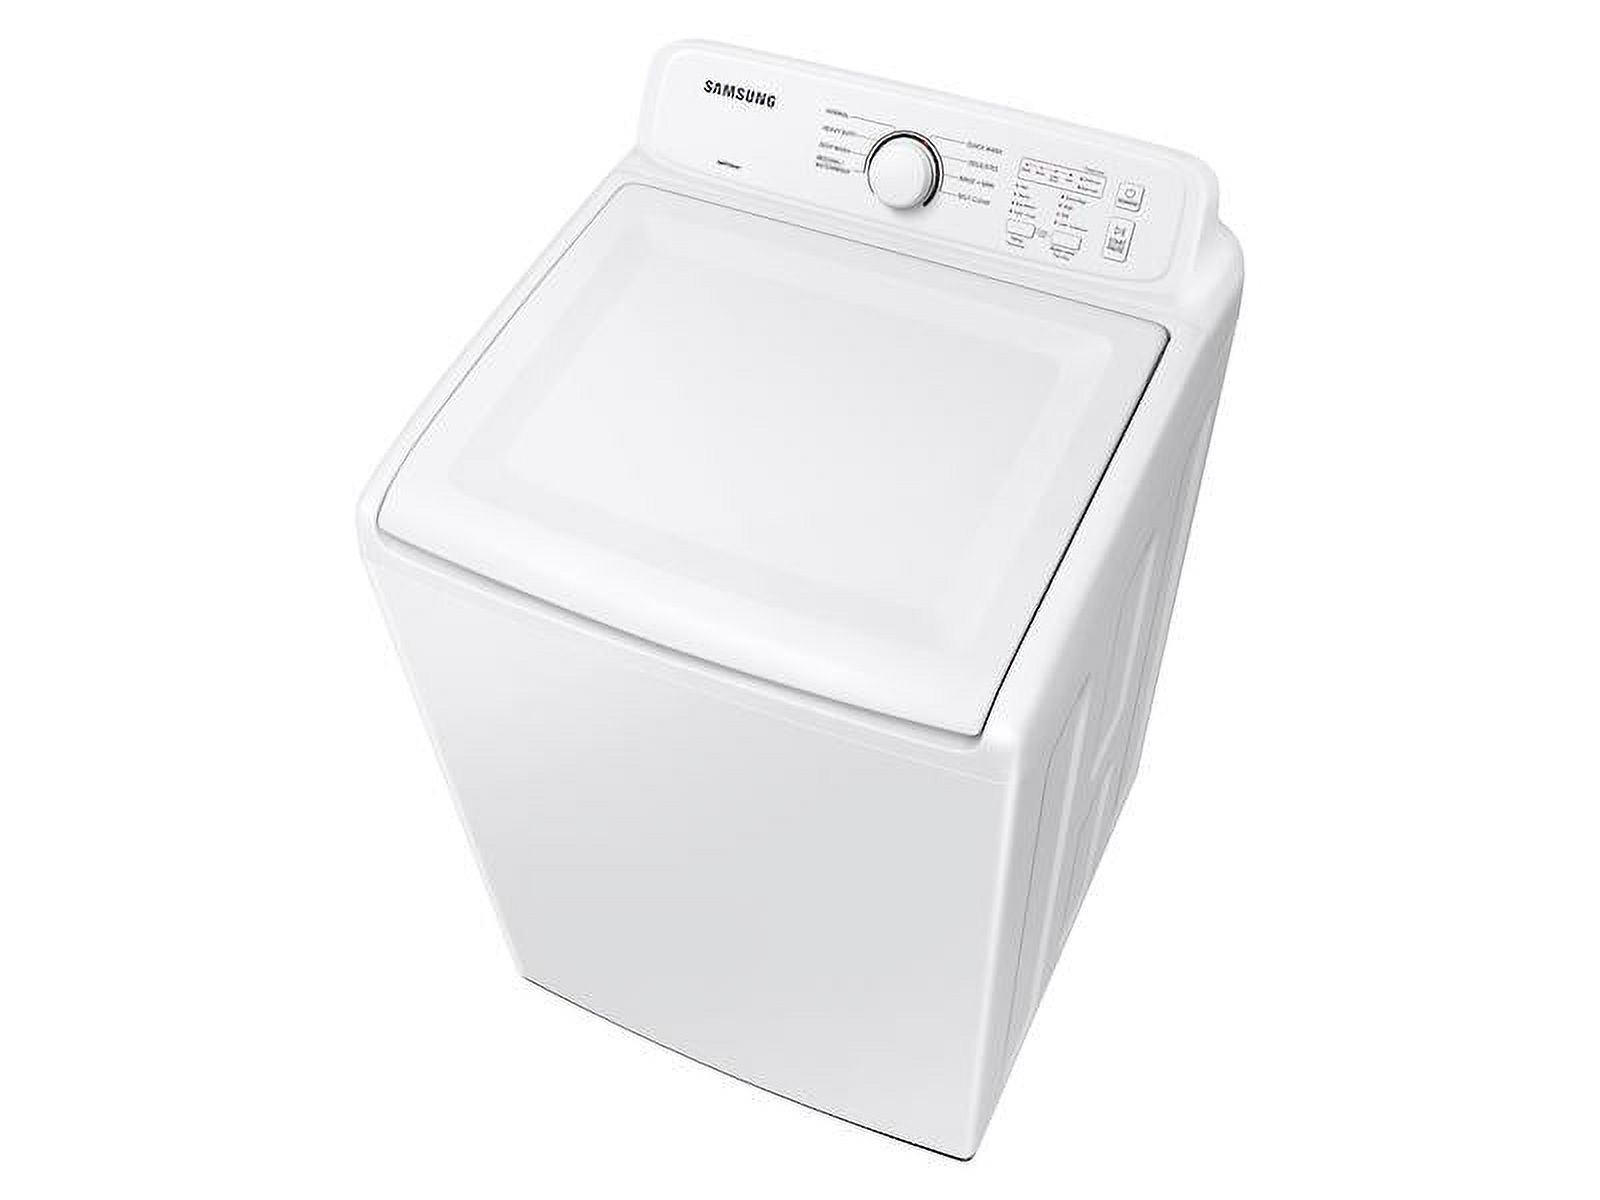 Samsung WA40A3005AW 4.0 Cu. Ft. High-Efficiency Top Load Washer - White - image 5 of 5